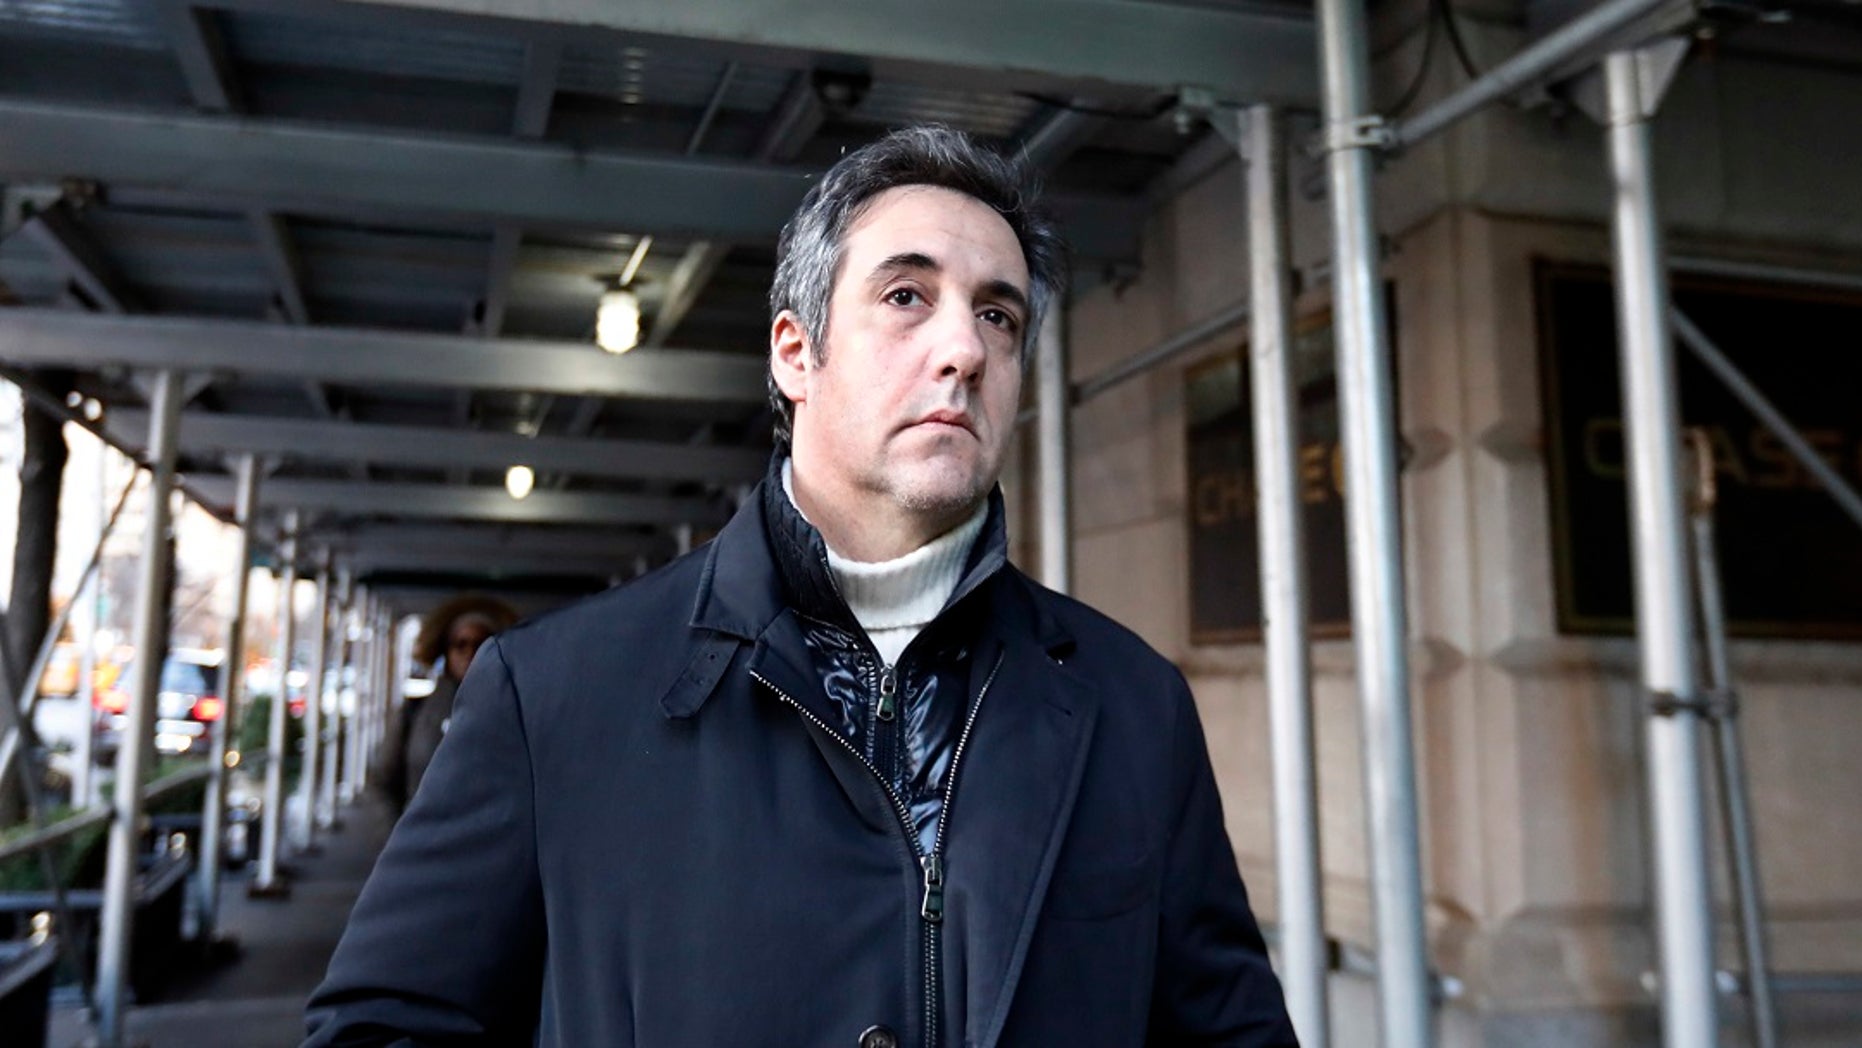 Trump attorney dismisses report alleging president told Cohen to lie to Congress; Dems calls for investigation